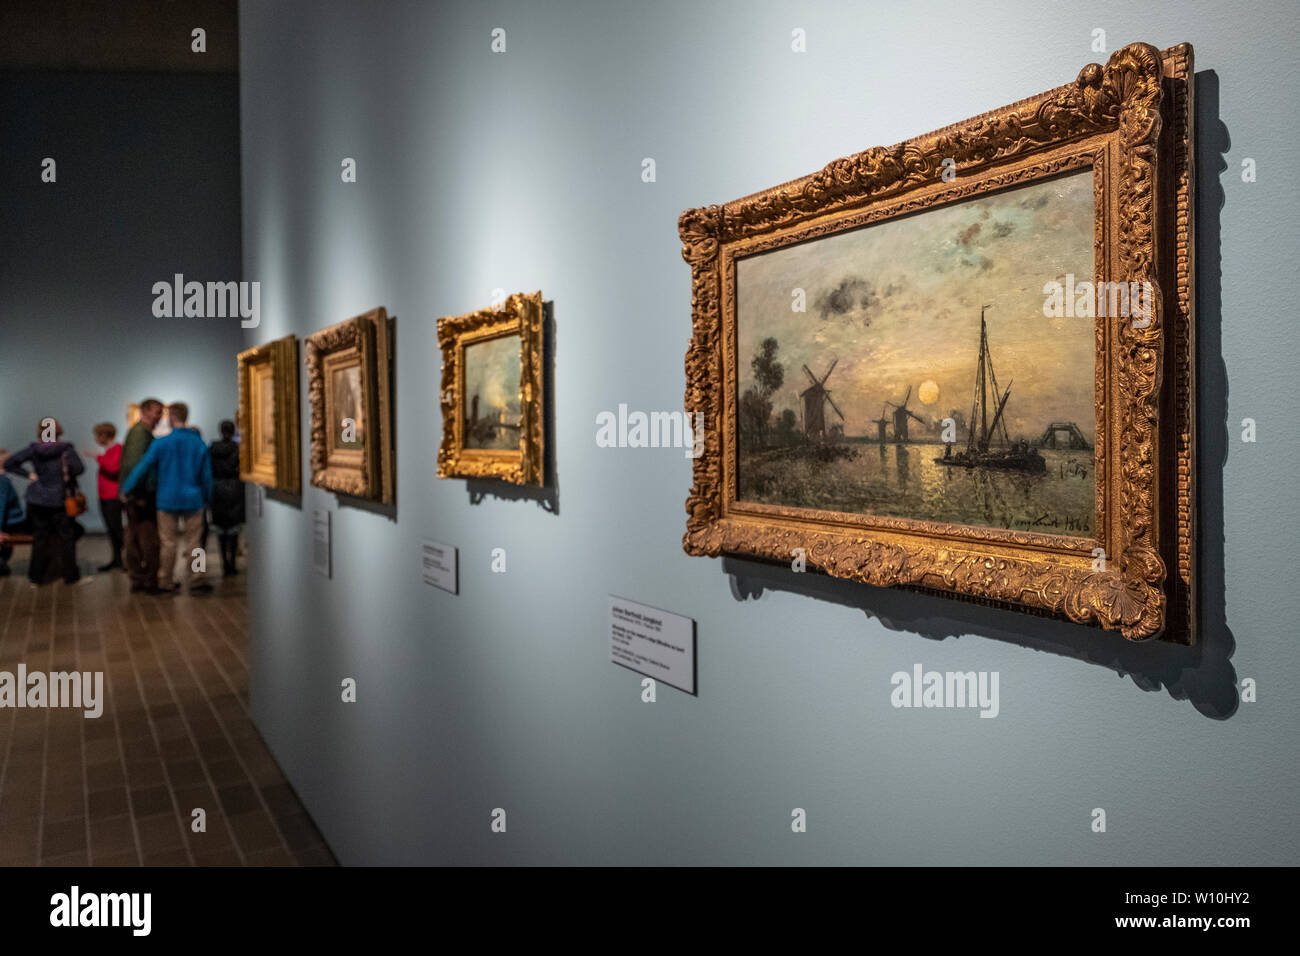 Visitors at the Claude Monet exhibition inside The National Gallery of Australia in Canberra, ACT, Australia. It's on display from 7 June till 1 Sep. Stock Photo